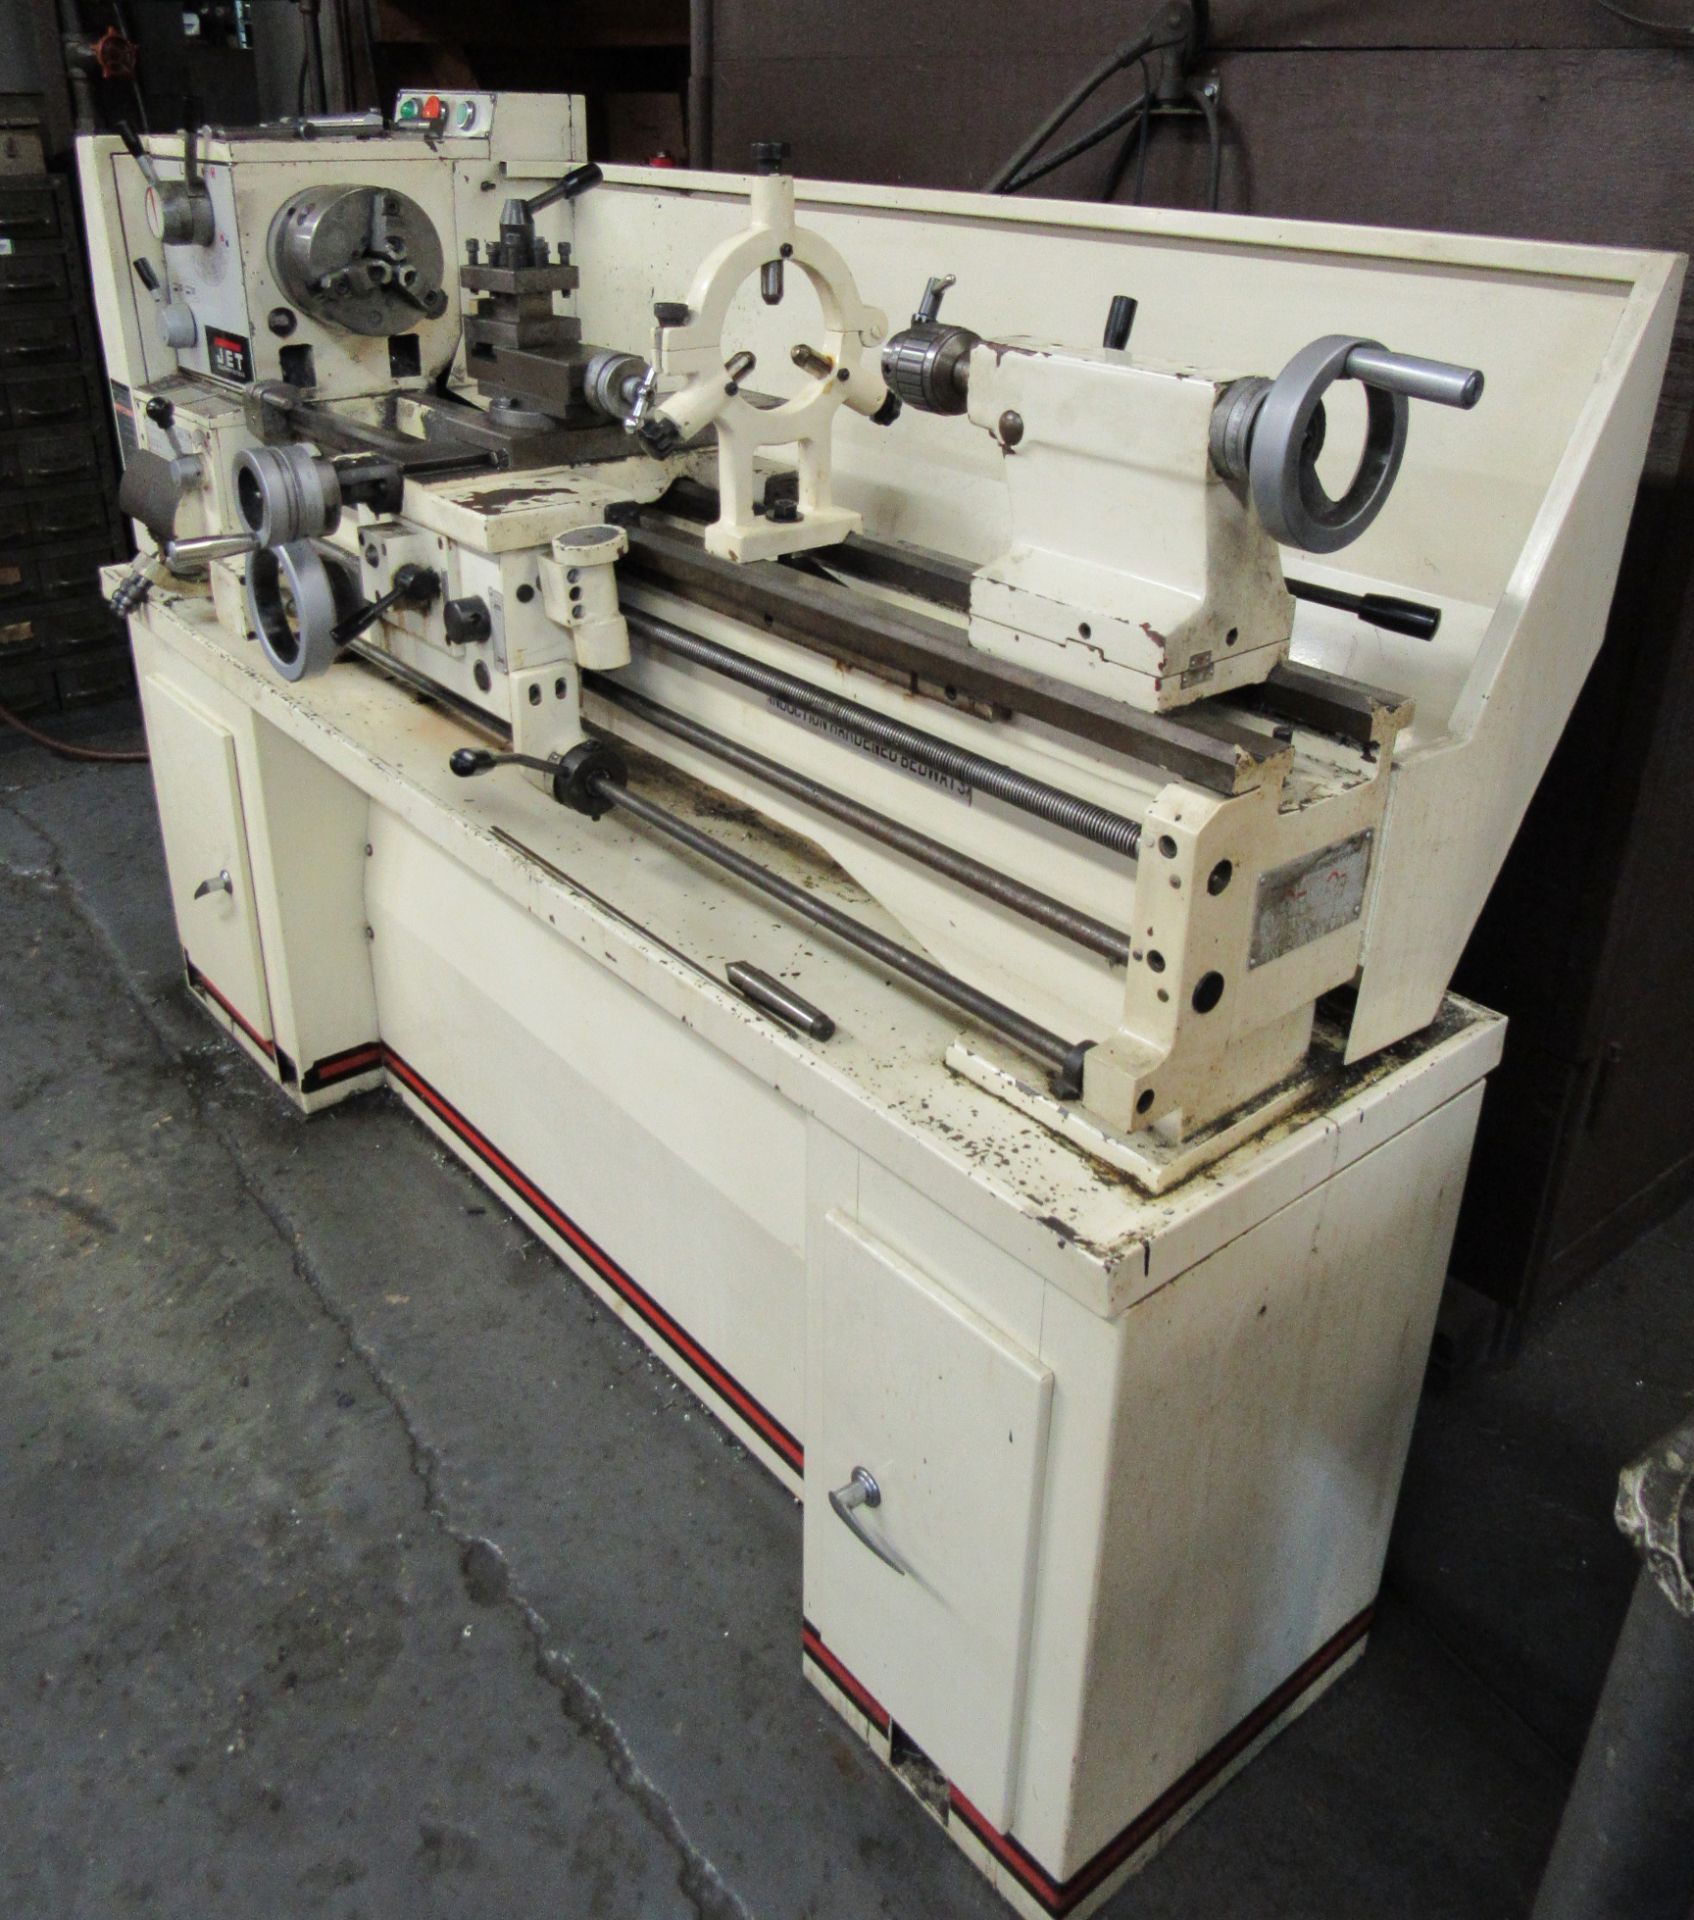 Jet Mod.GHB-1340 13"/18" x 40" Geared Gap Lathe - New 2000, Spindle Speeds 70 - 2000 RPM, 18-3/4" - Image 2 of 5